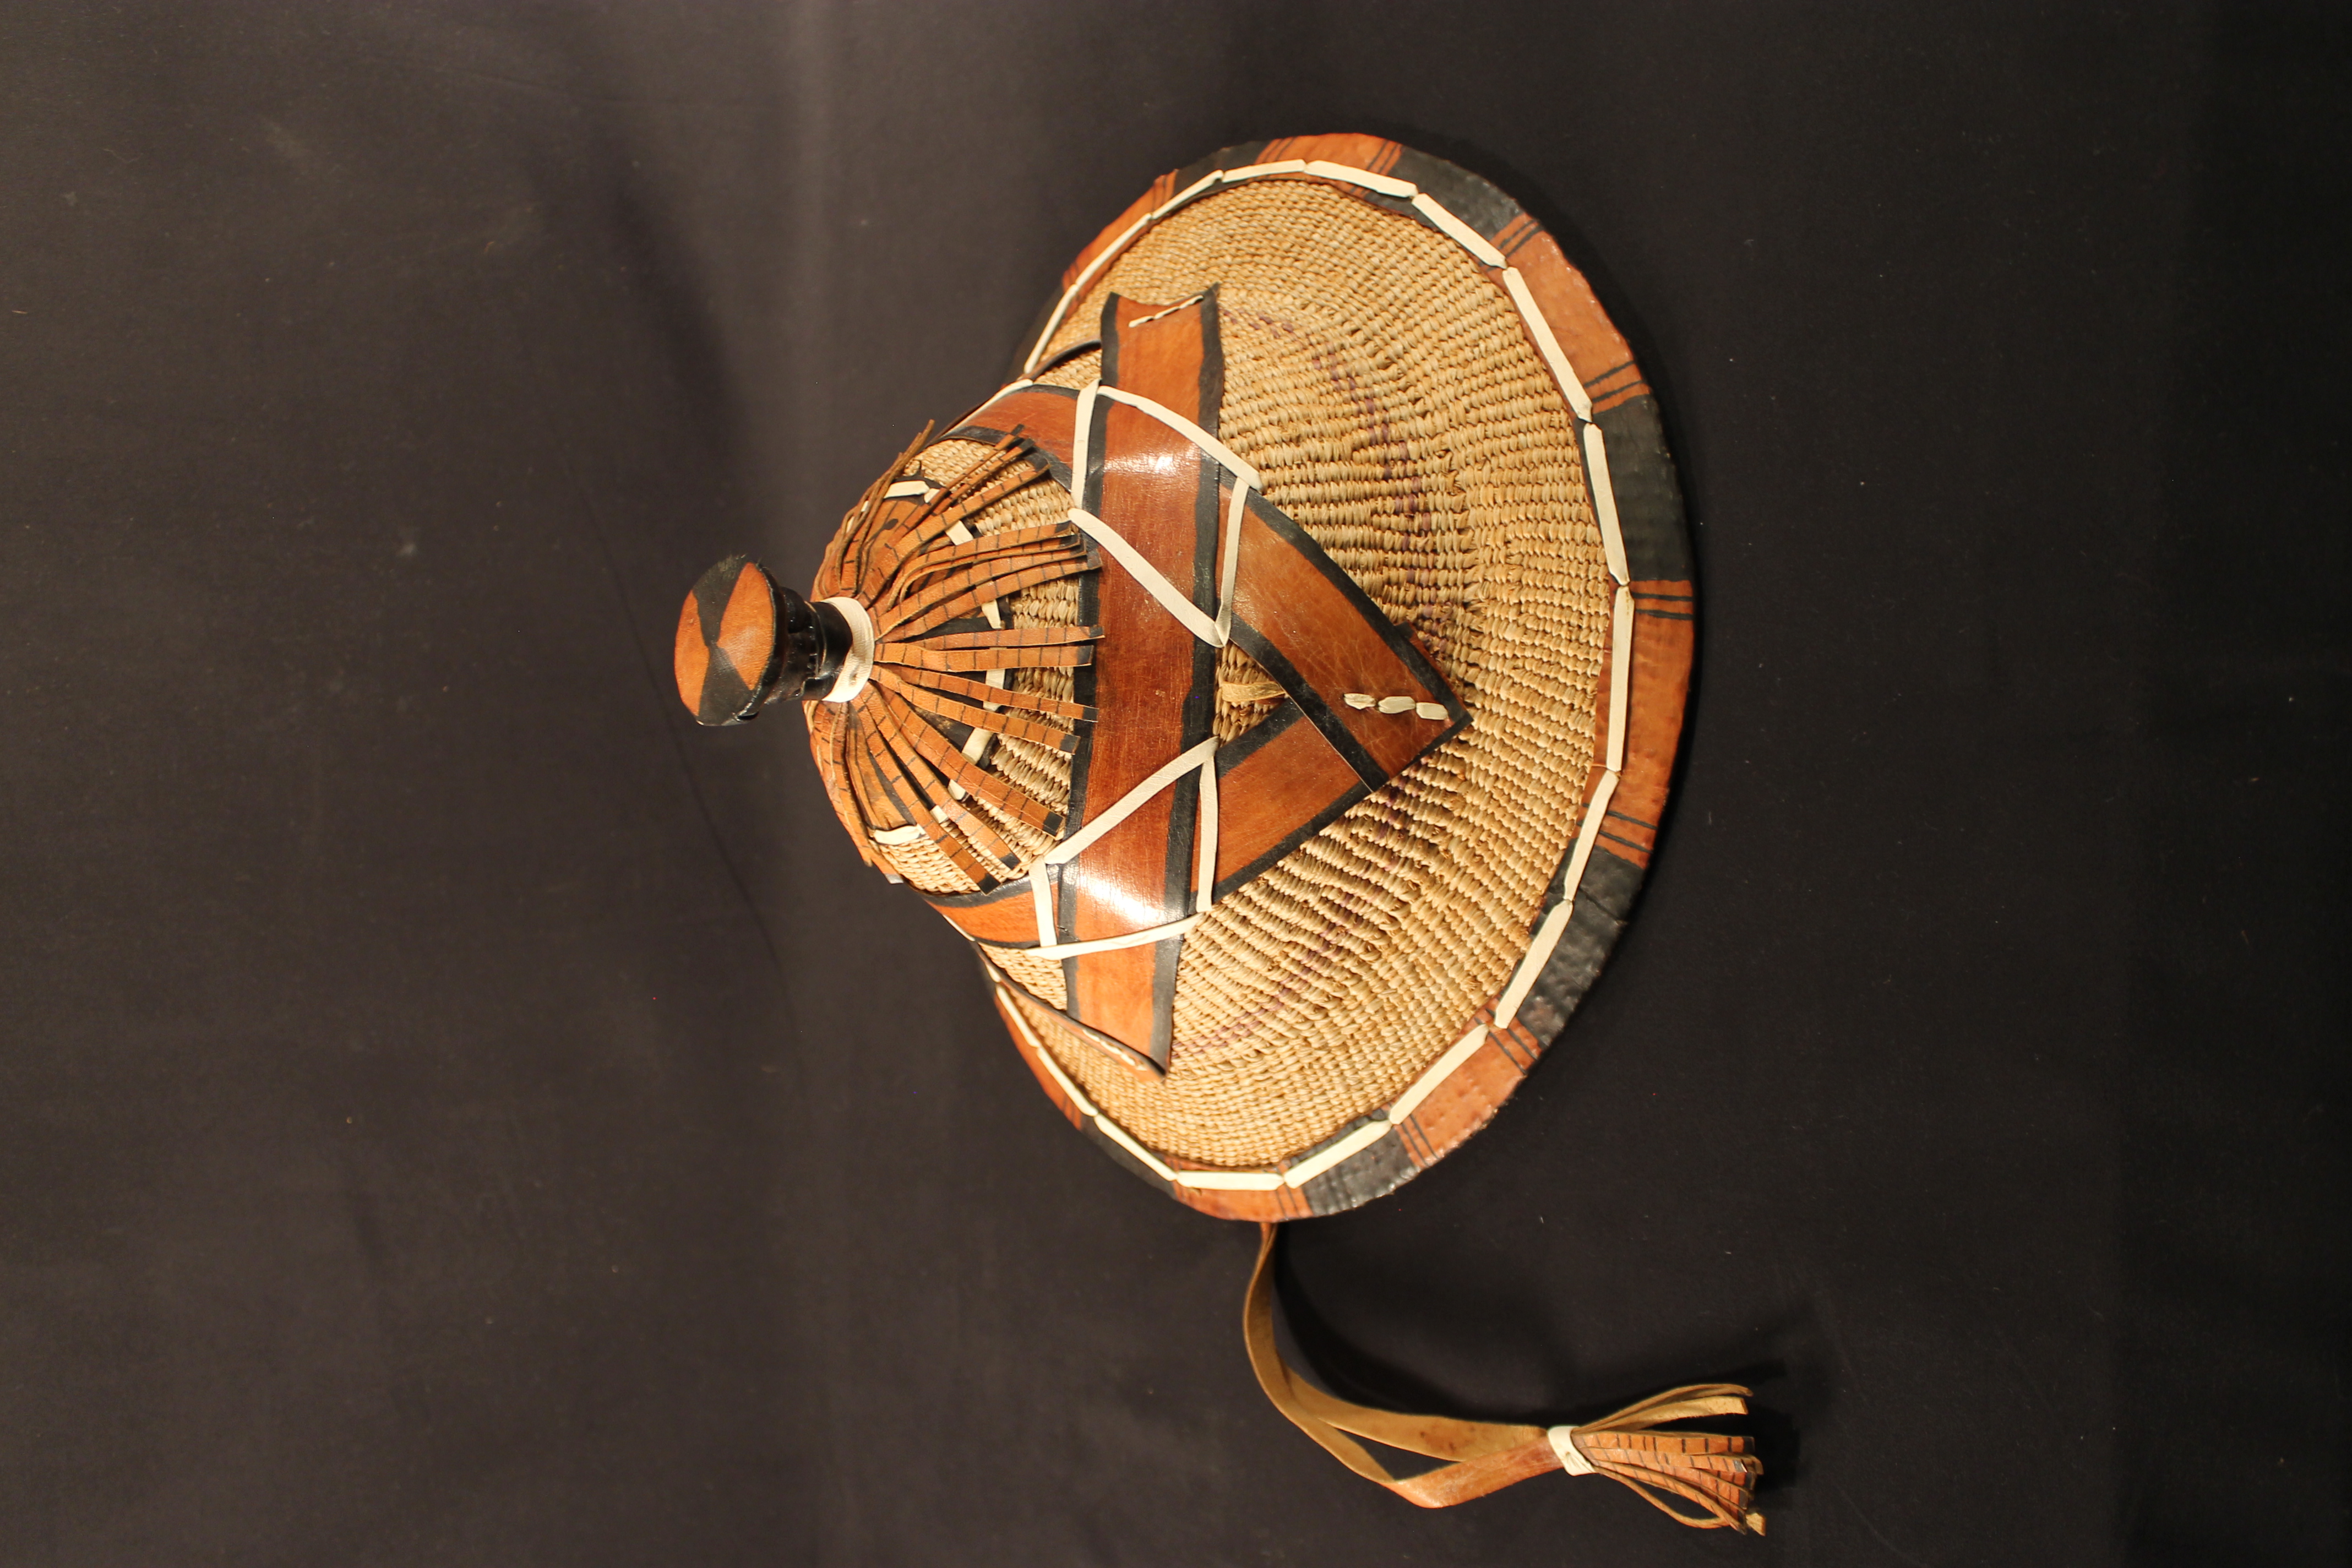 The hat is made of straw covered in leather design. The brim is covered by reddish/brown and black leather stitched in white leather, while the tip of the hat has a leather design to form a star. 